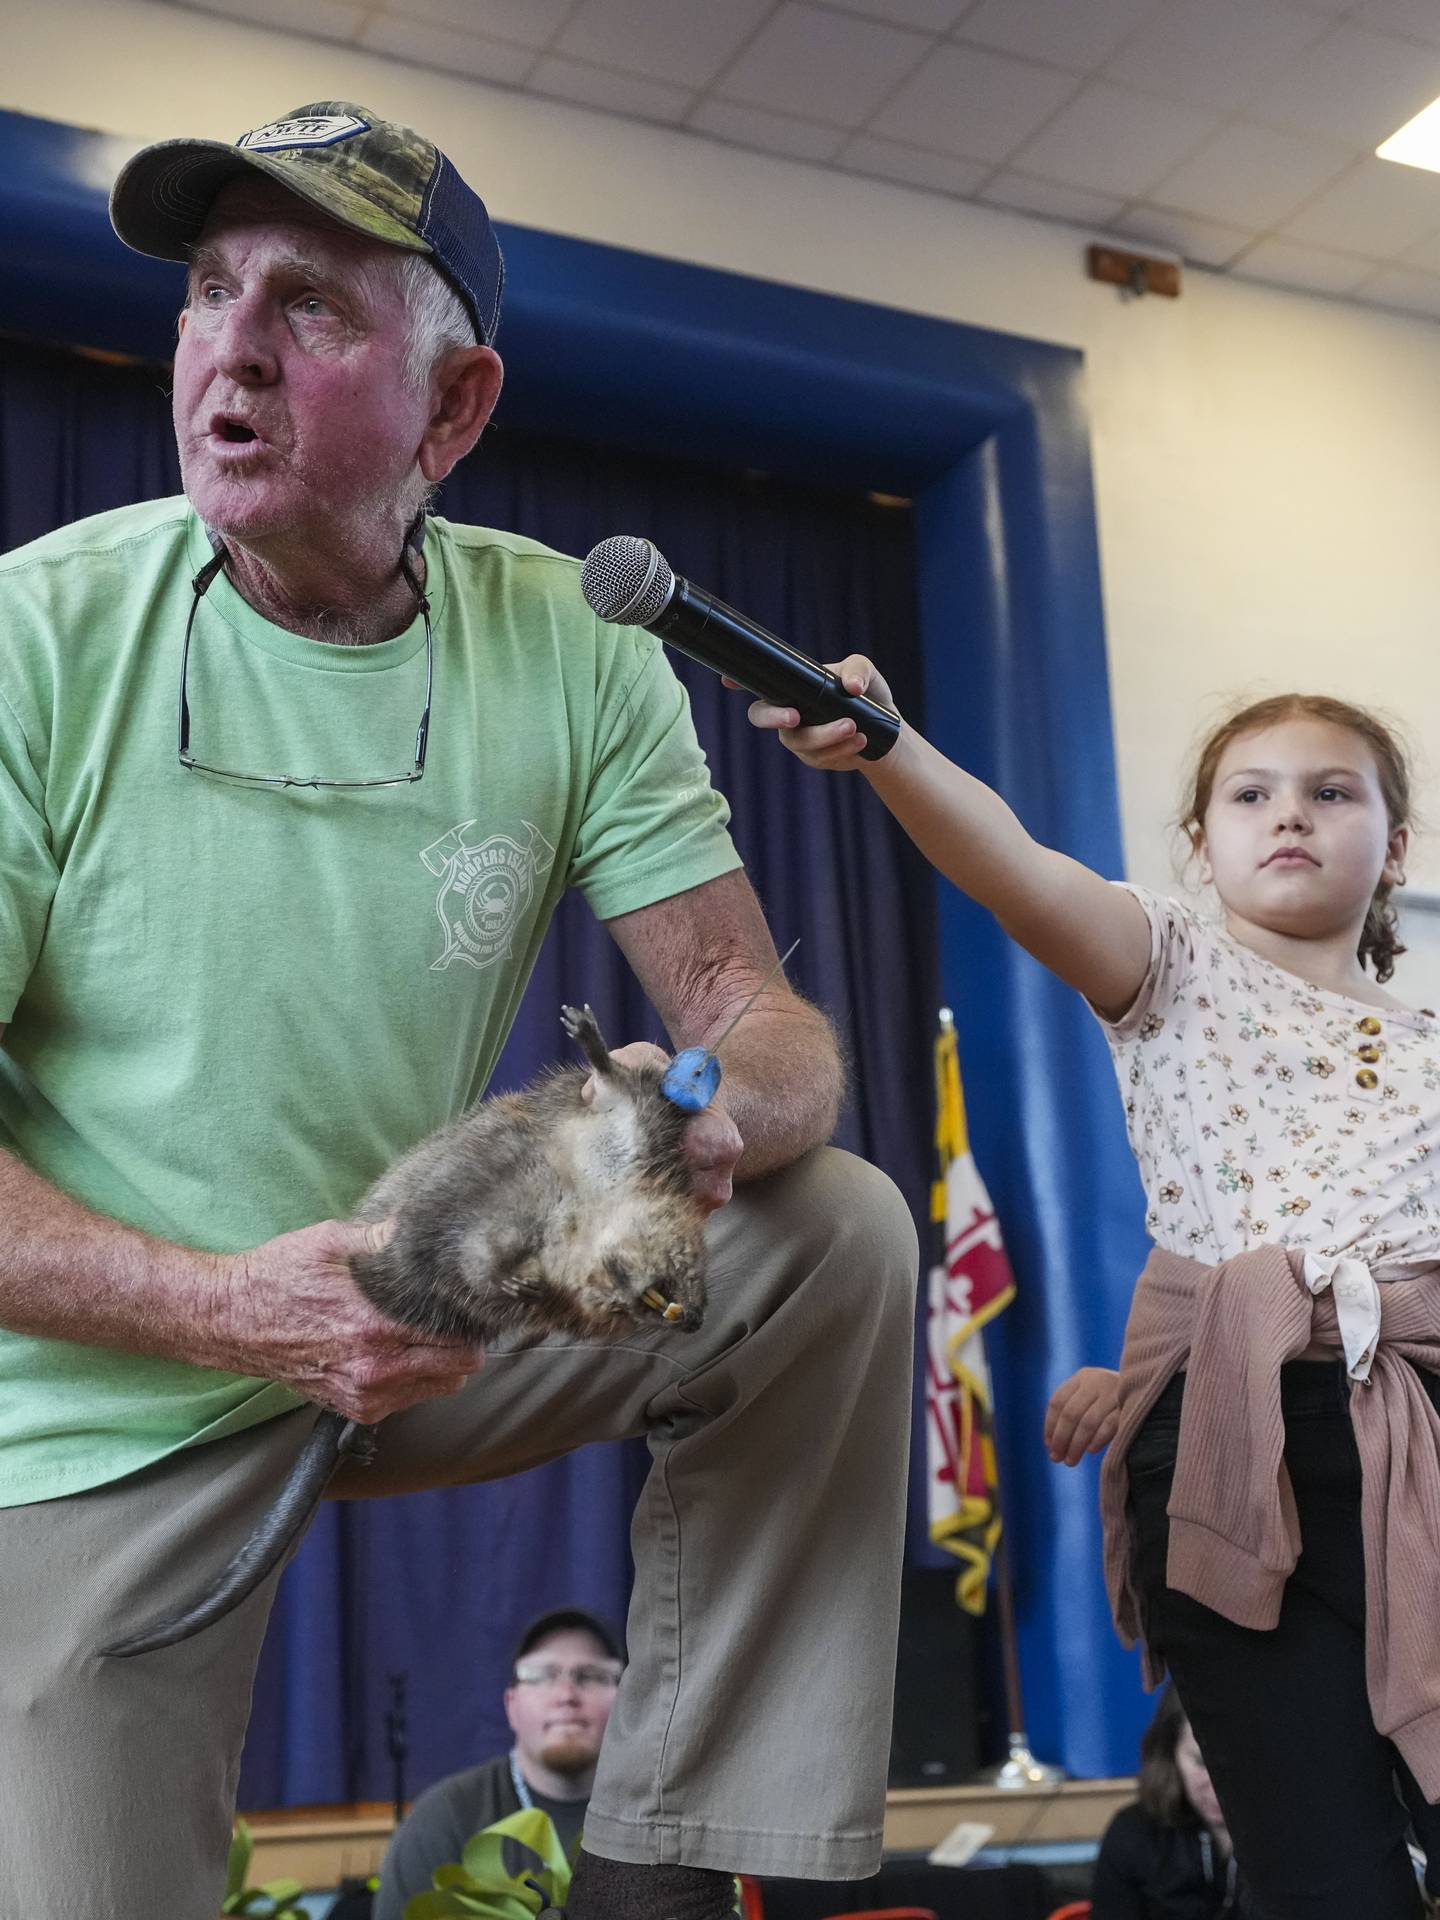 Kinsley Aaron, 10, holds the microphone for Buddy Flowers, 66, as he skins a muskrat for an audience explaining the process as he goes.